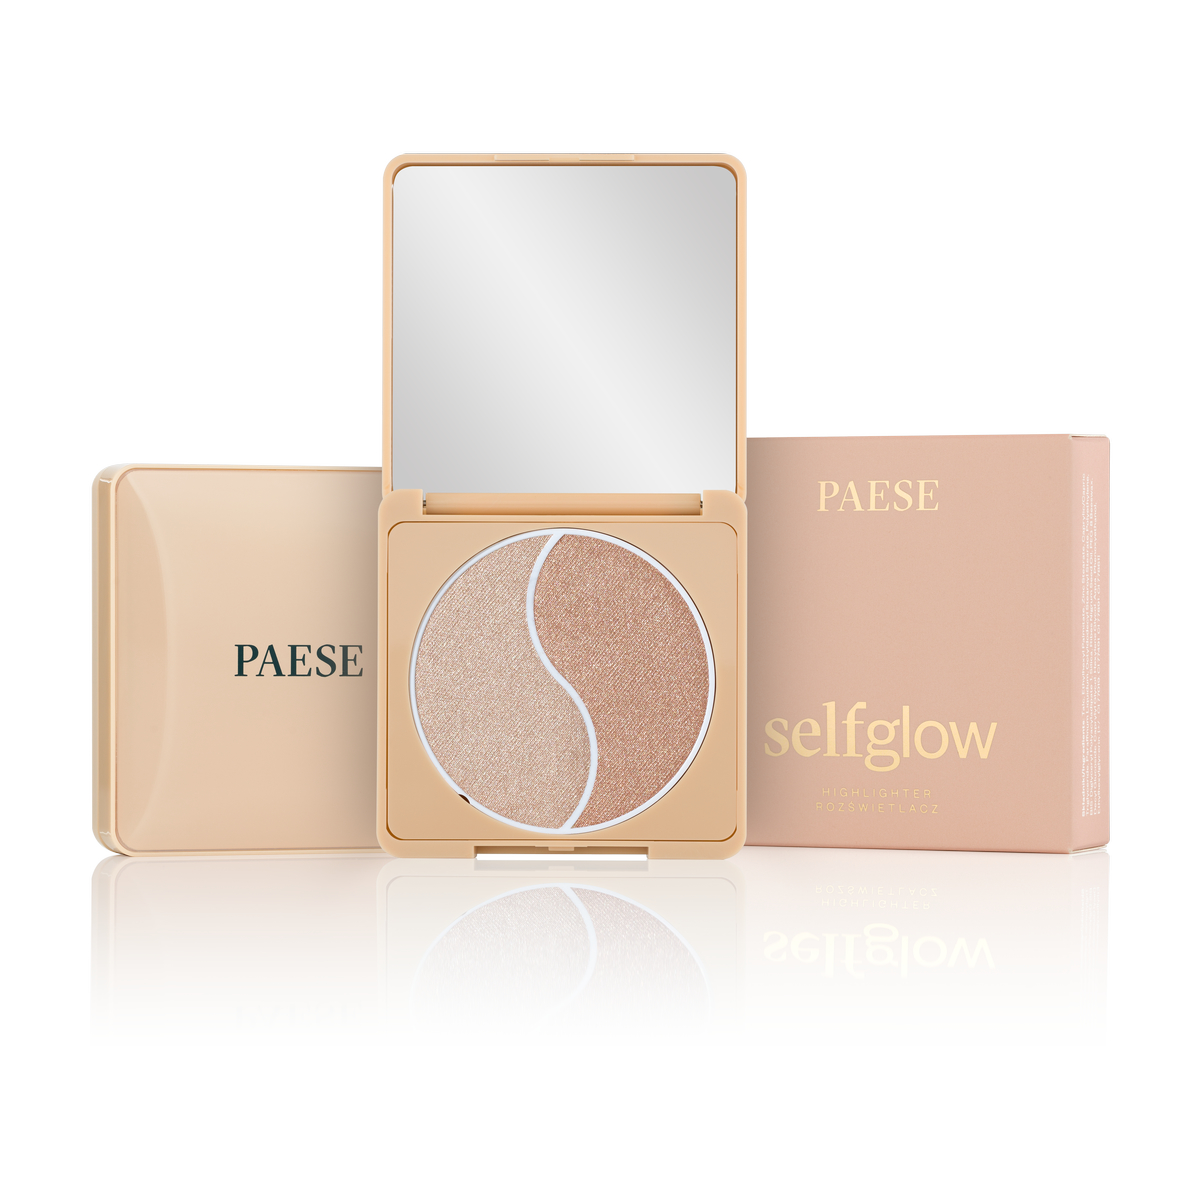 Selfglow Highlighter Box + Product + Compact result